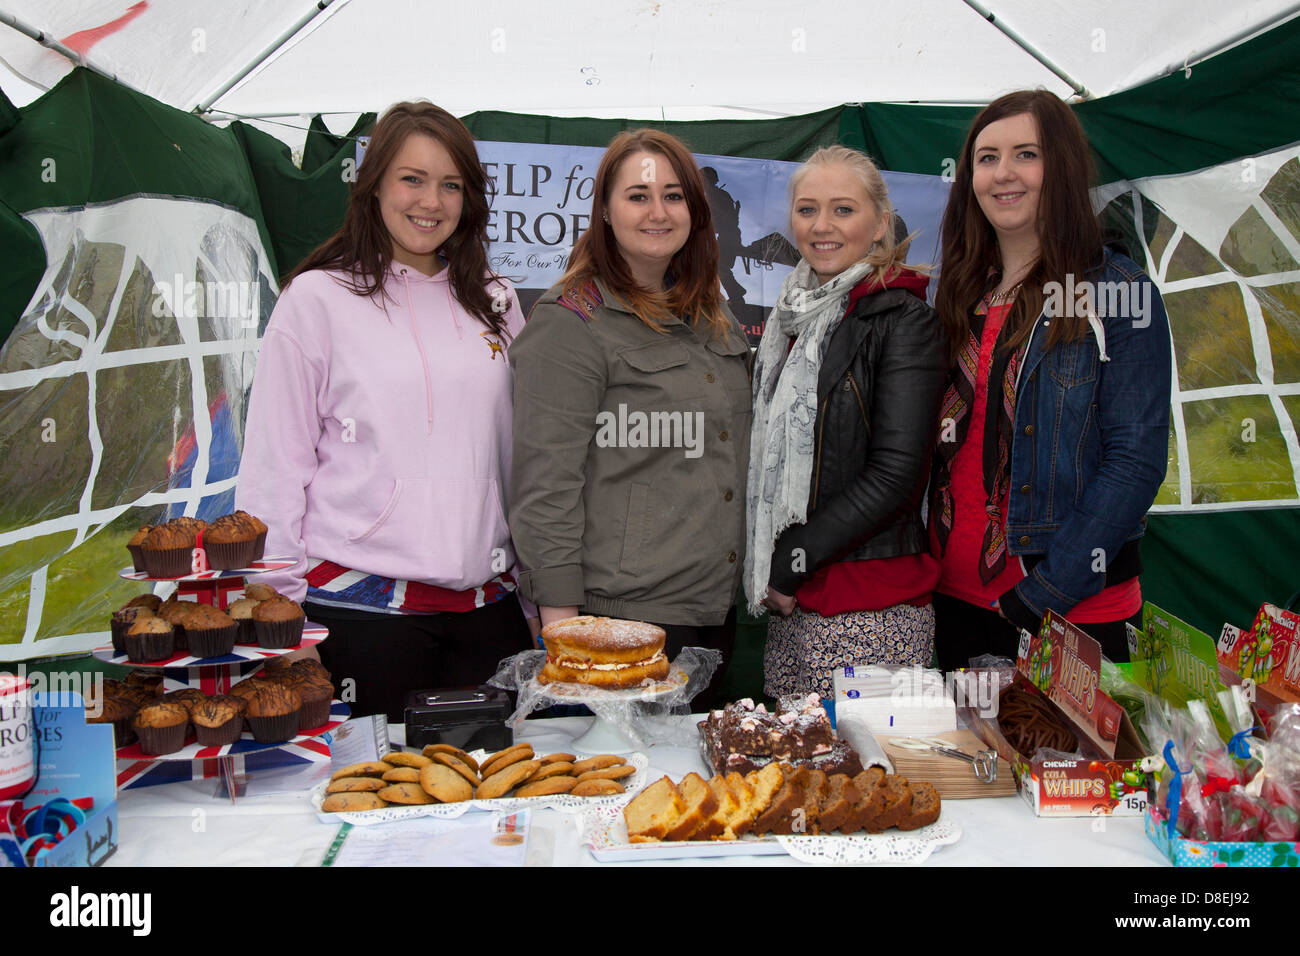 Turton, Lancashire, UK 27th May 2013. Help the Hero's Stall with Laura Carruthers 20, Liz Turner 20, Vicky Stewart 20, and Katie Pamphilan 21 from London at the annual traditional spring fair held in the grounds of the 600-year-old Turton Tower.  The event dates back more than 200 years, but went into decline in the early 20th century. It was revived in 2008 by the Friends of Turton Tower. Stock Photo